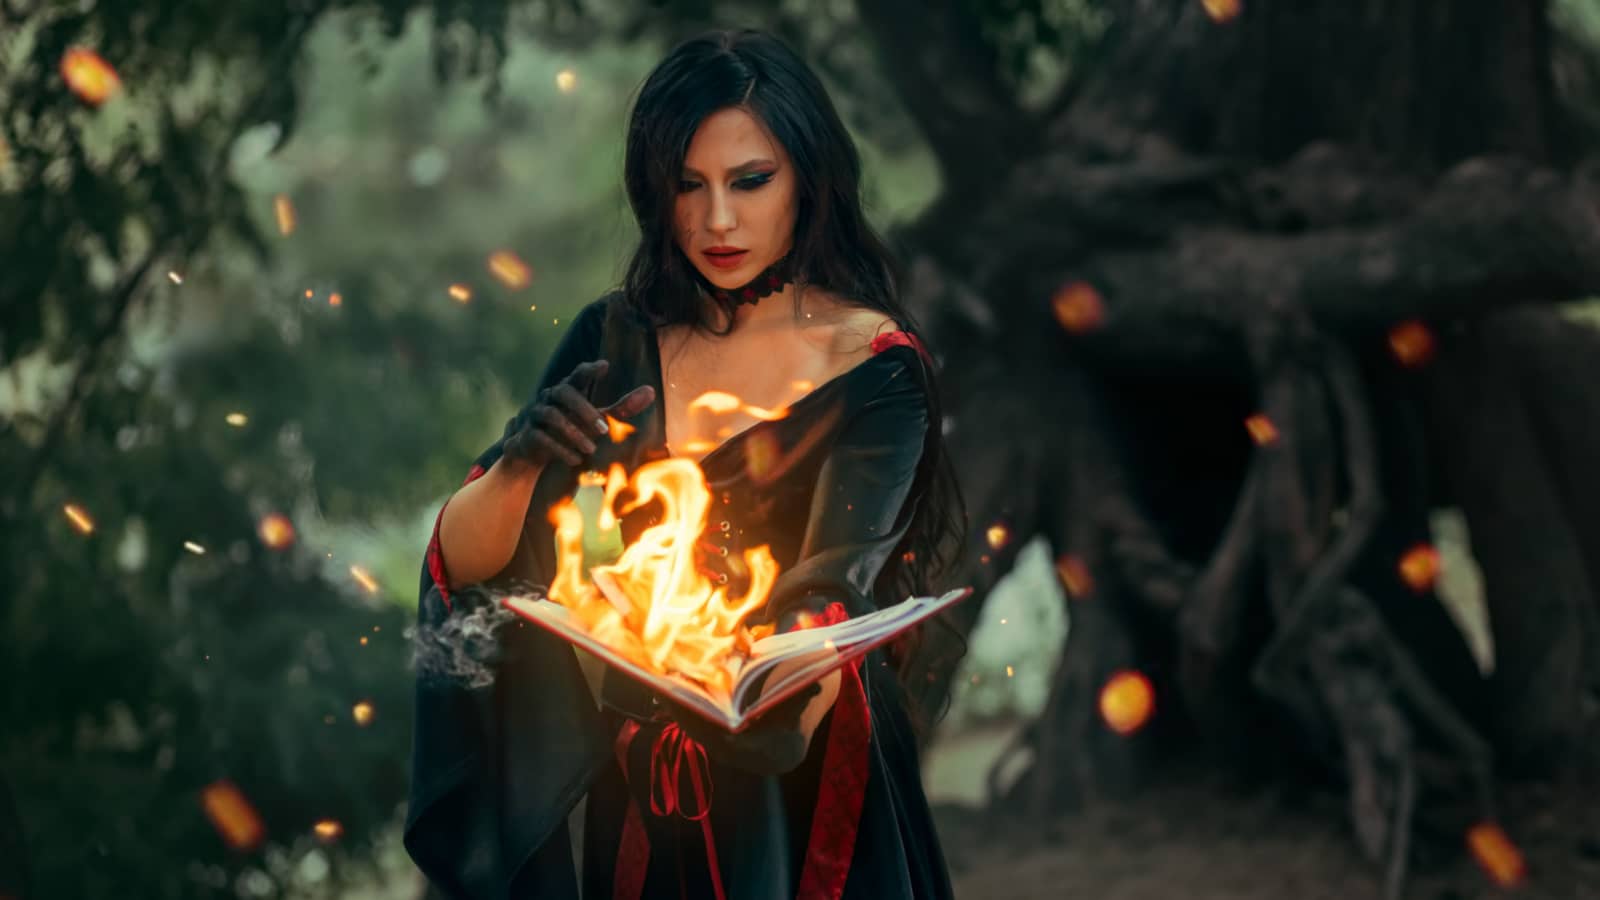 Fantasy halloween woman witch holds old burning magic book in hand, reads spell Paper page in bright flame fire light. Gothic girl sexy face in ashes, black dress costume. Dark night forest trees. Art